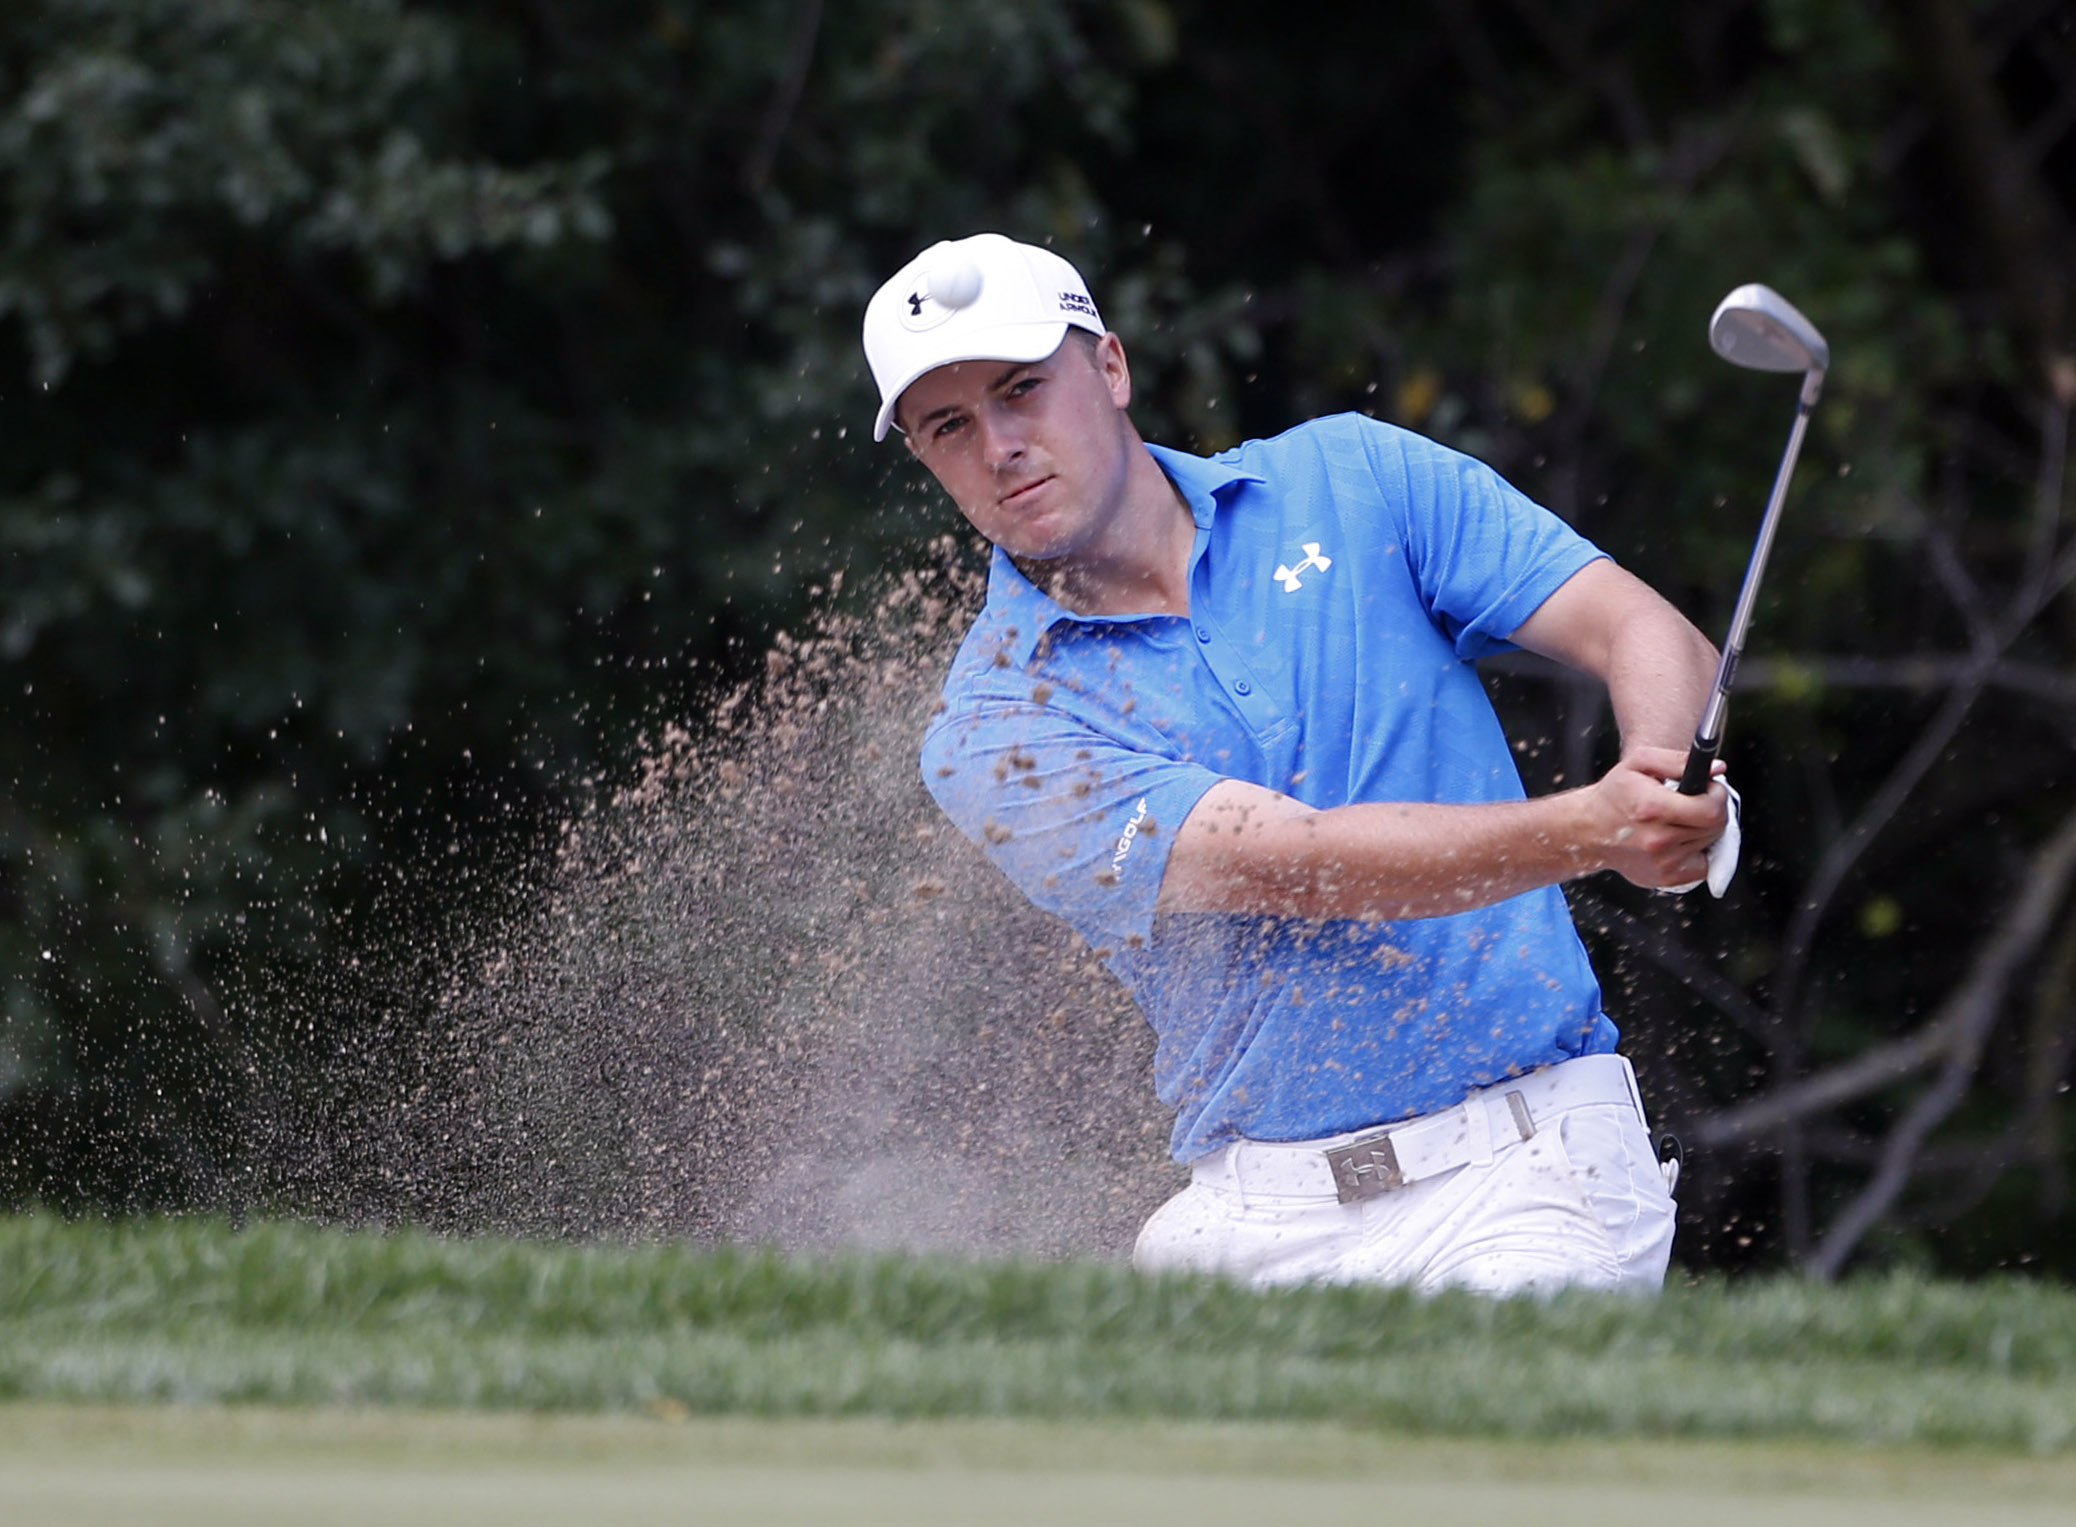 Sep 17, 2015; Lake Forest, IL, USA; PGA golfer Jordan Spieth hits out of a sand trap on the 6th hole during the first round of the BMW Championship at Conway Farms Golf Club. Mandatory Credit: Brian Spurlock-USA TODAY Sports